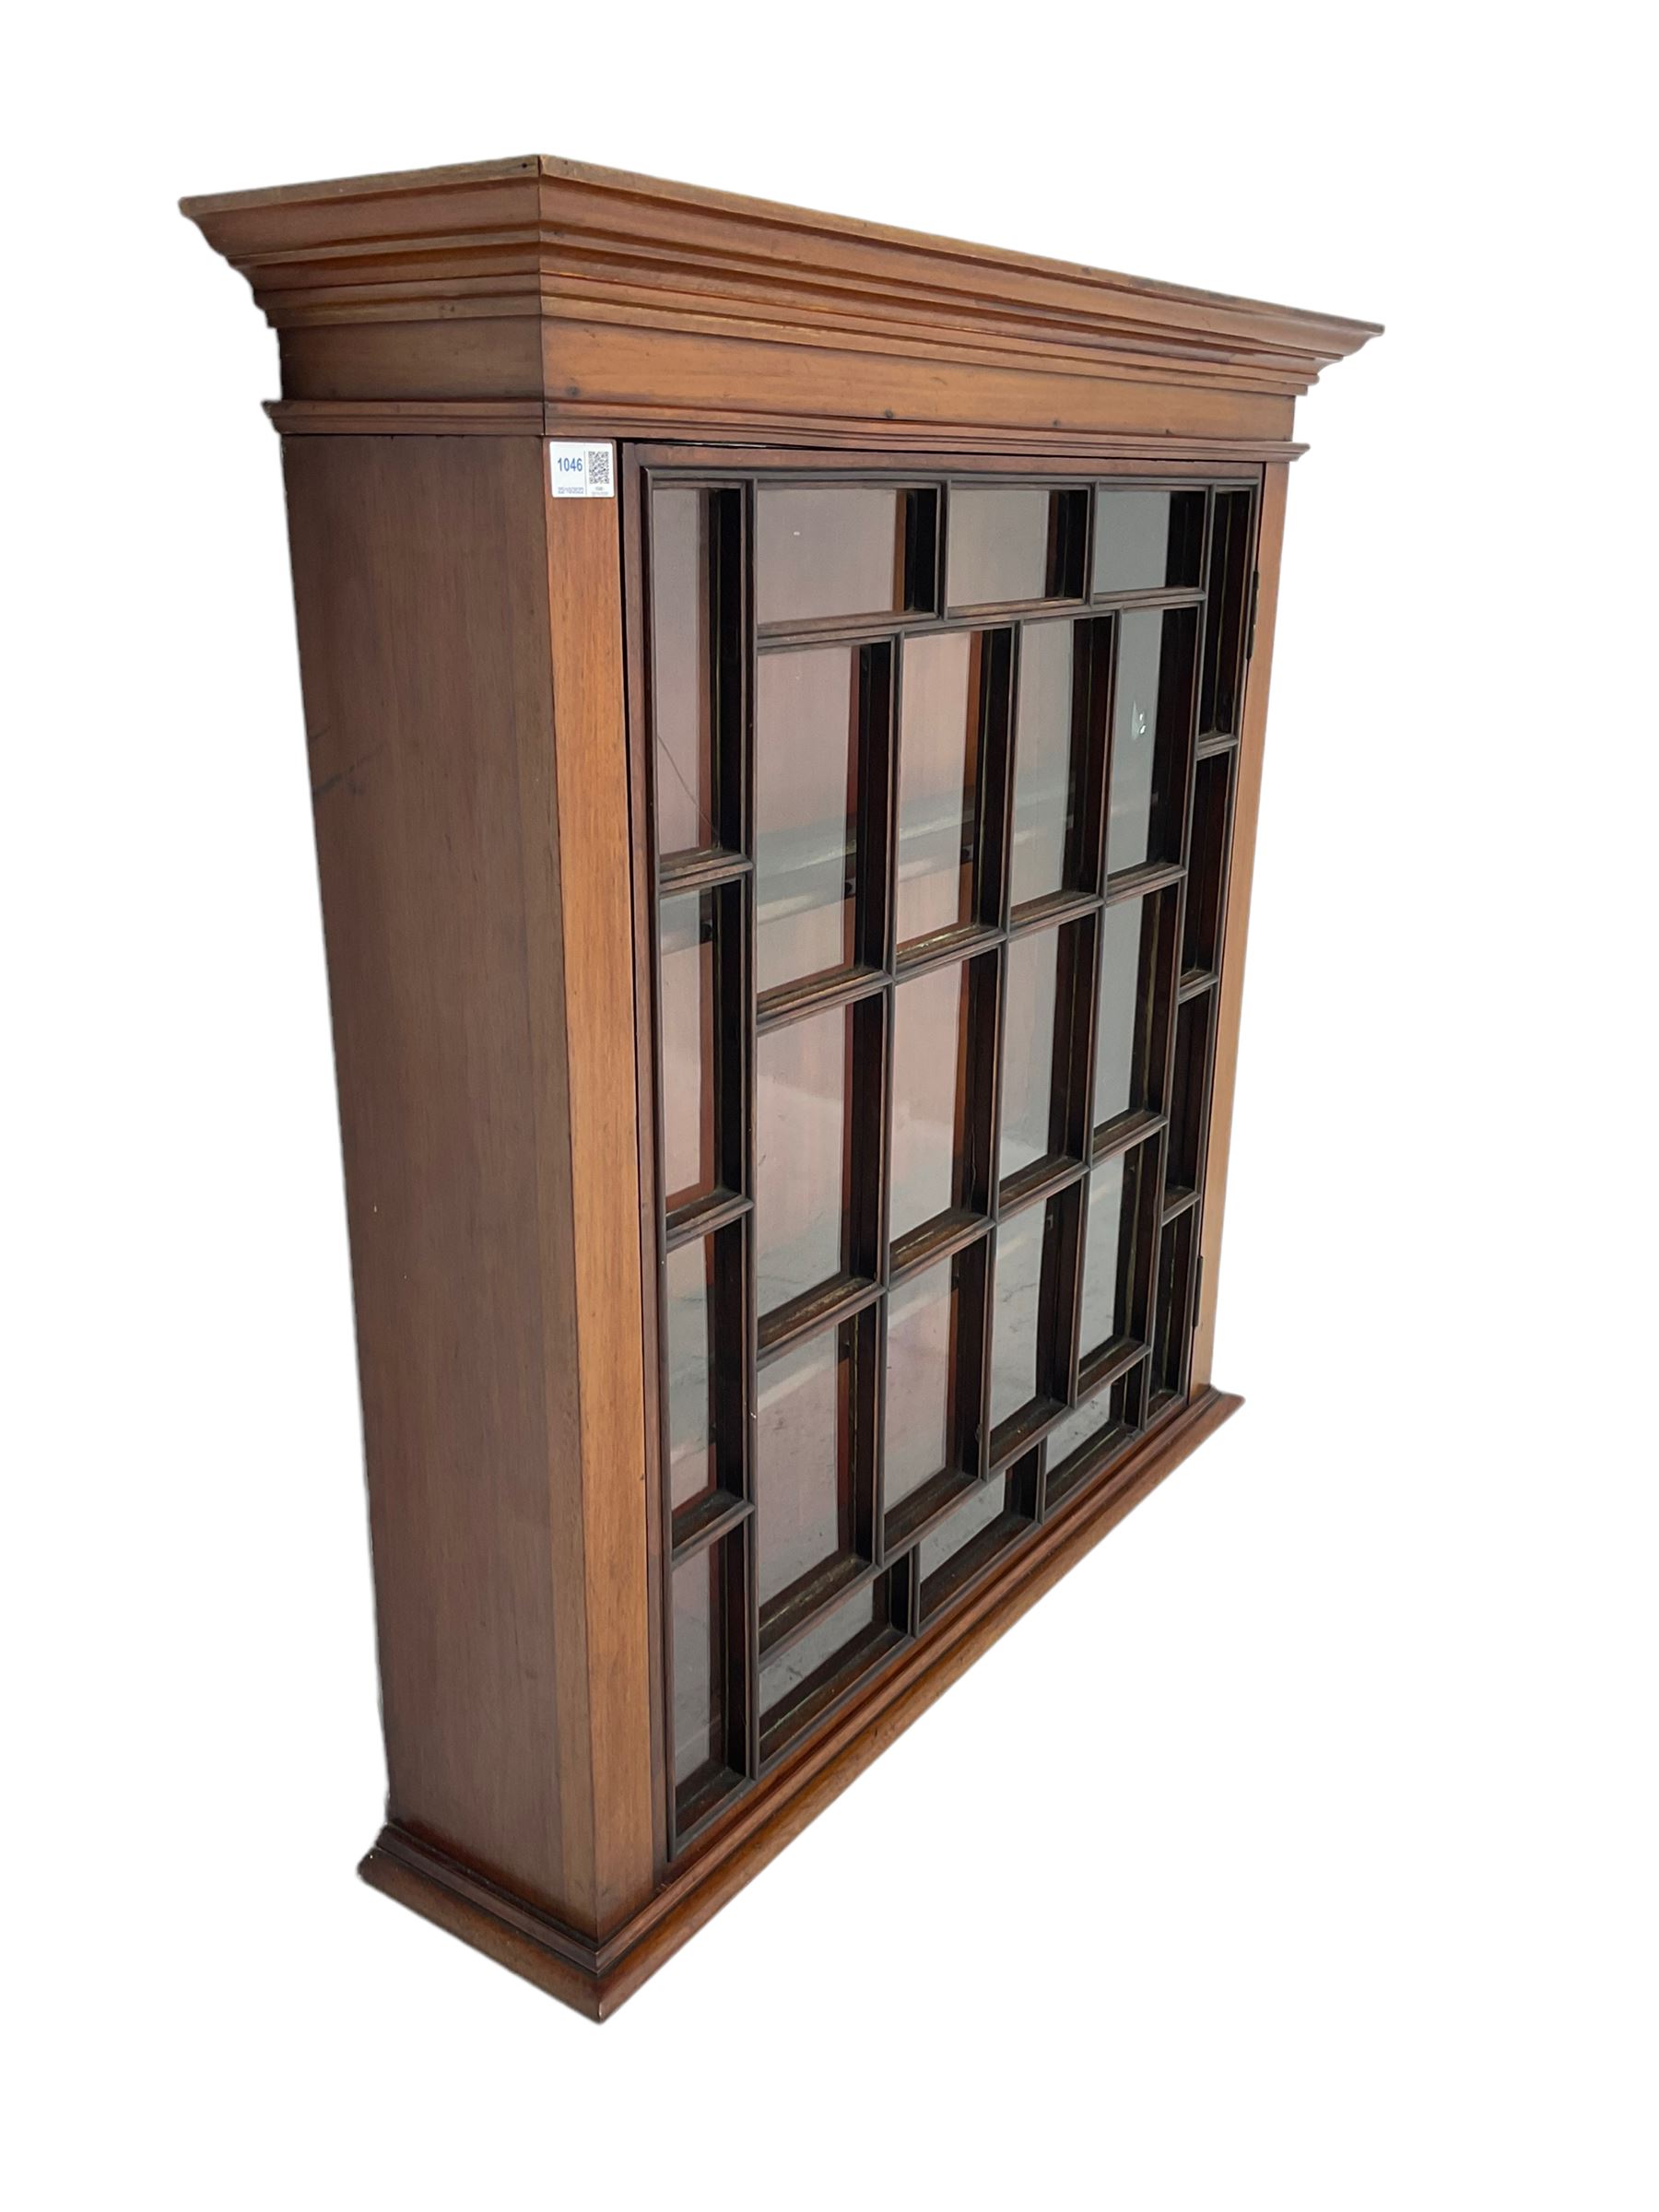 Early 20th century mahogany wall hanging cabinet - Image 6 of 6